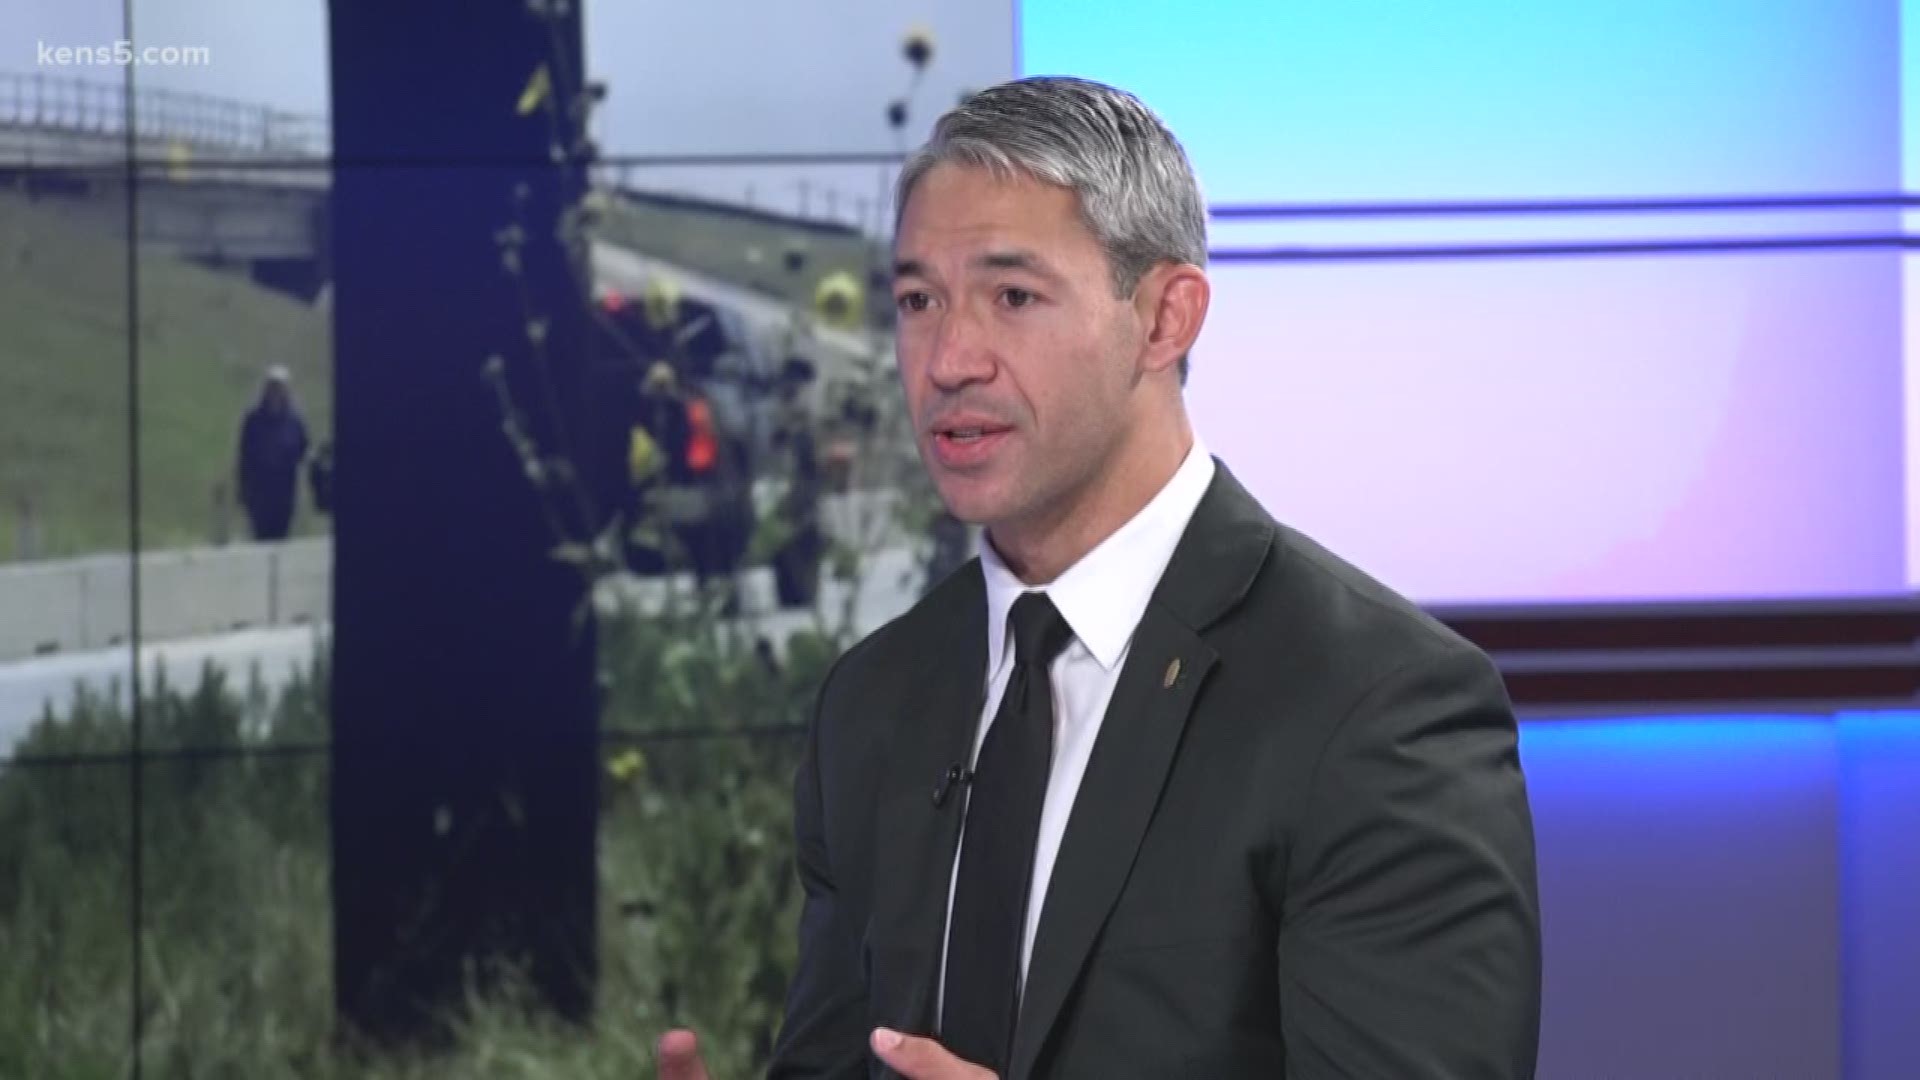 Mayor Ron Nirenberg of San Antonio stops by the KENS 5 studio to talk about his Climate Action Plan ahead of his presentation to city council.